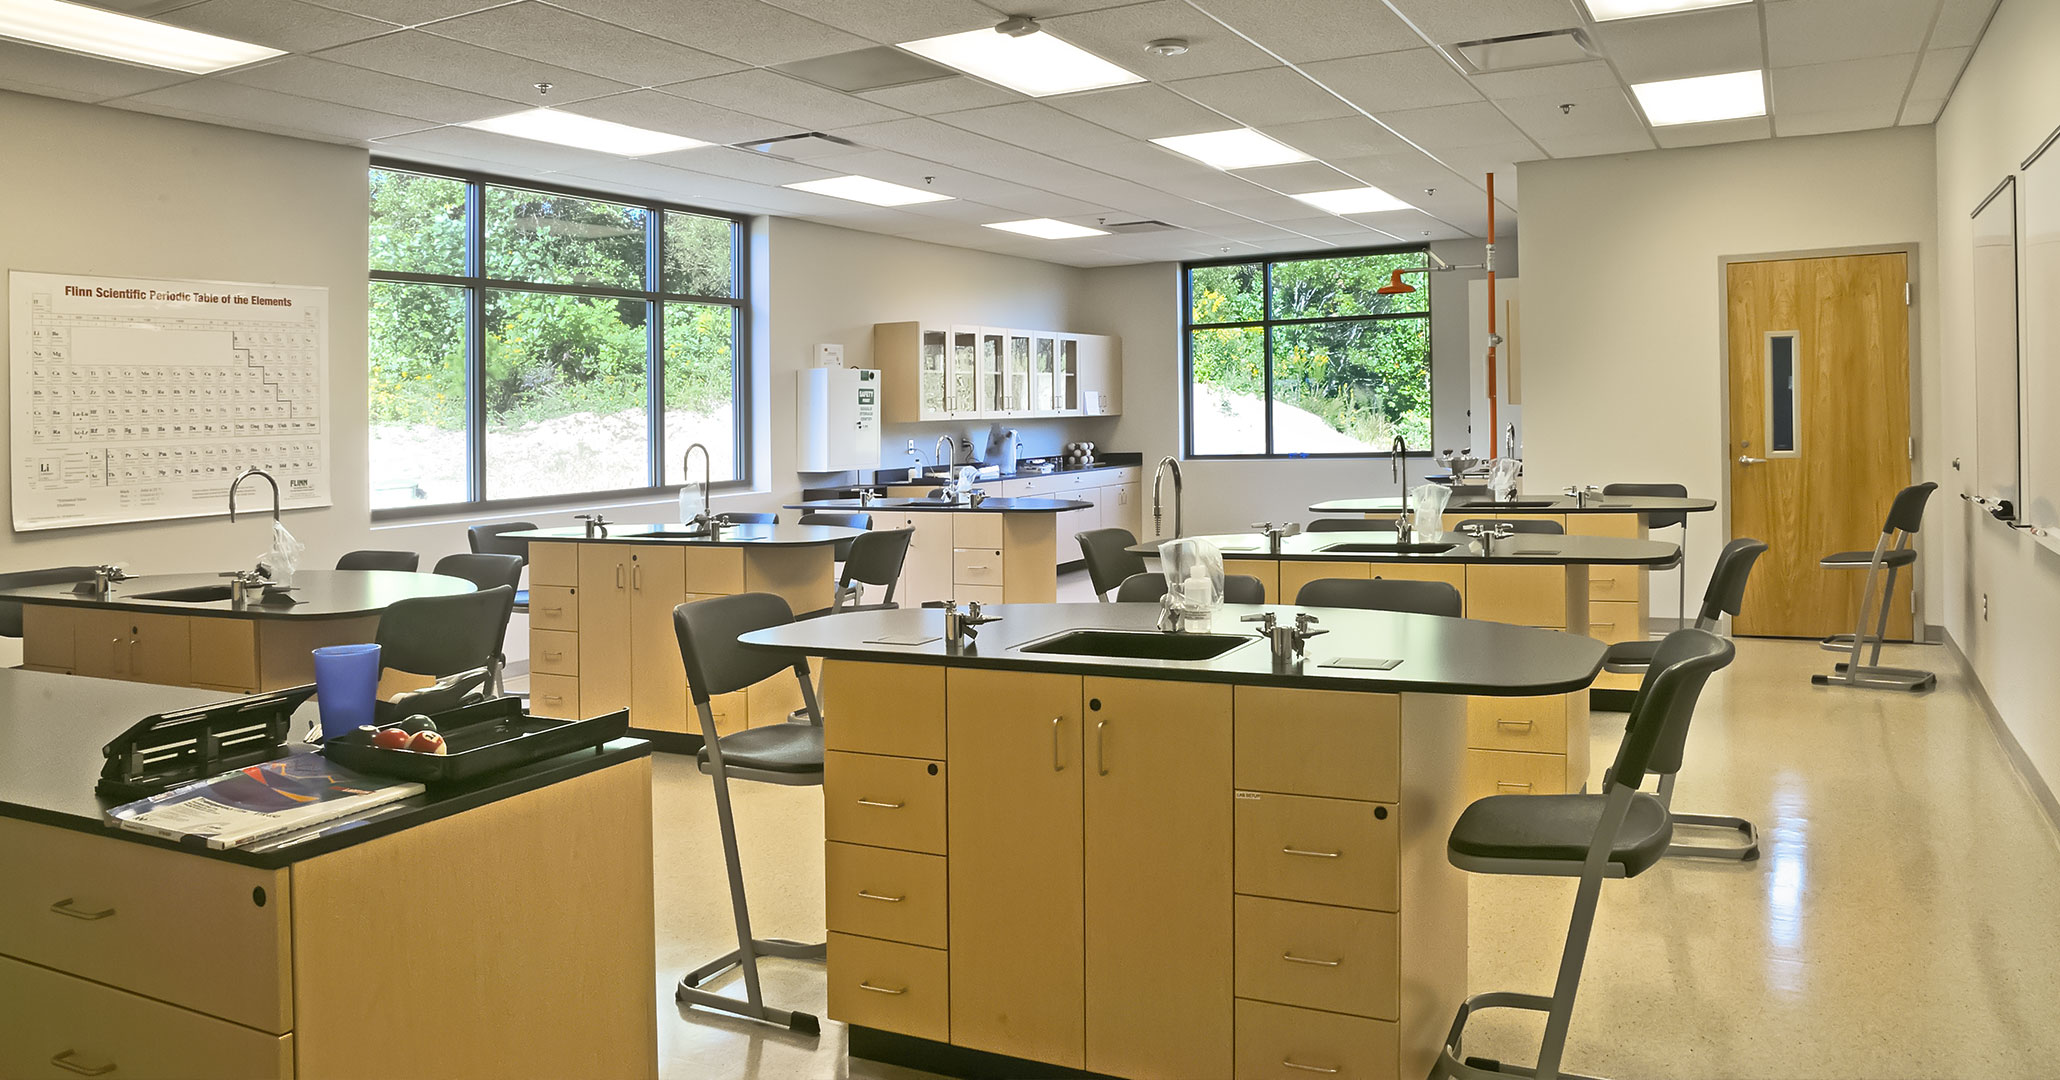 The Charlotte Diocese and Christ the King Catholic High School worked with Boudreaux master planners and architects to design the school’s science labs.